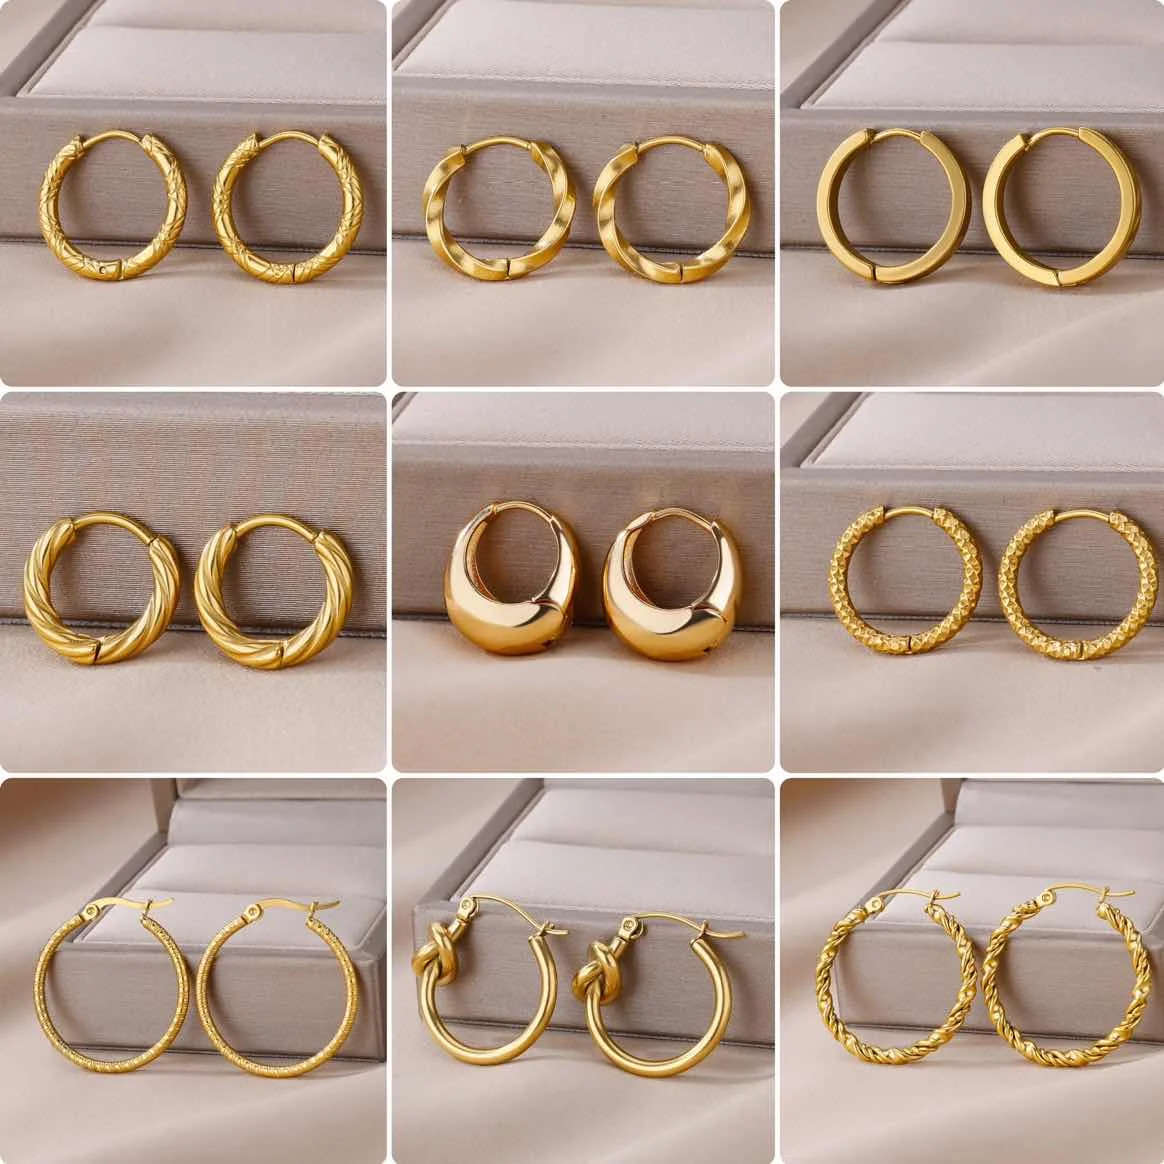 

Vintage Chunky Round Earrings For Women Gold Color Stainless Steel Twisted Hoop Earring Statement Wedding Christmas Jewelry Gift